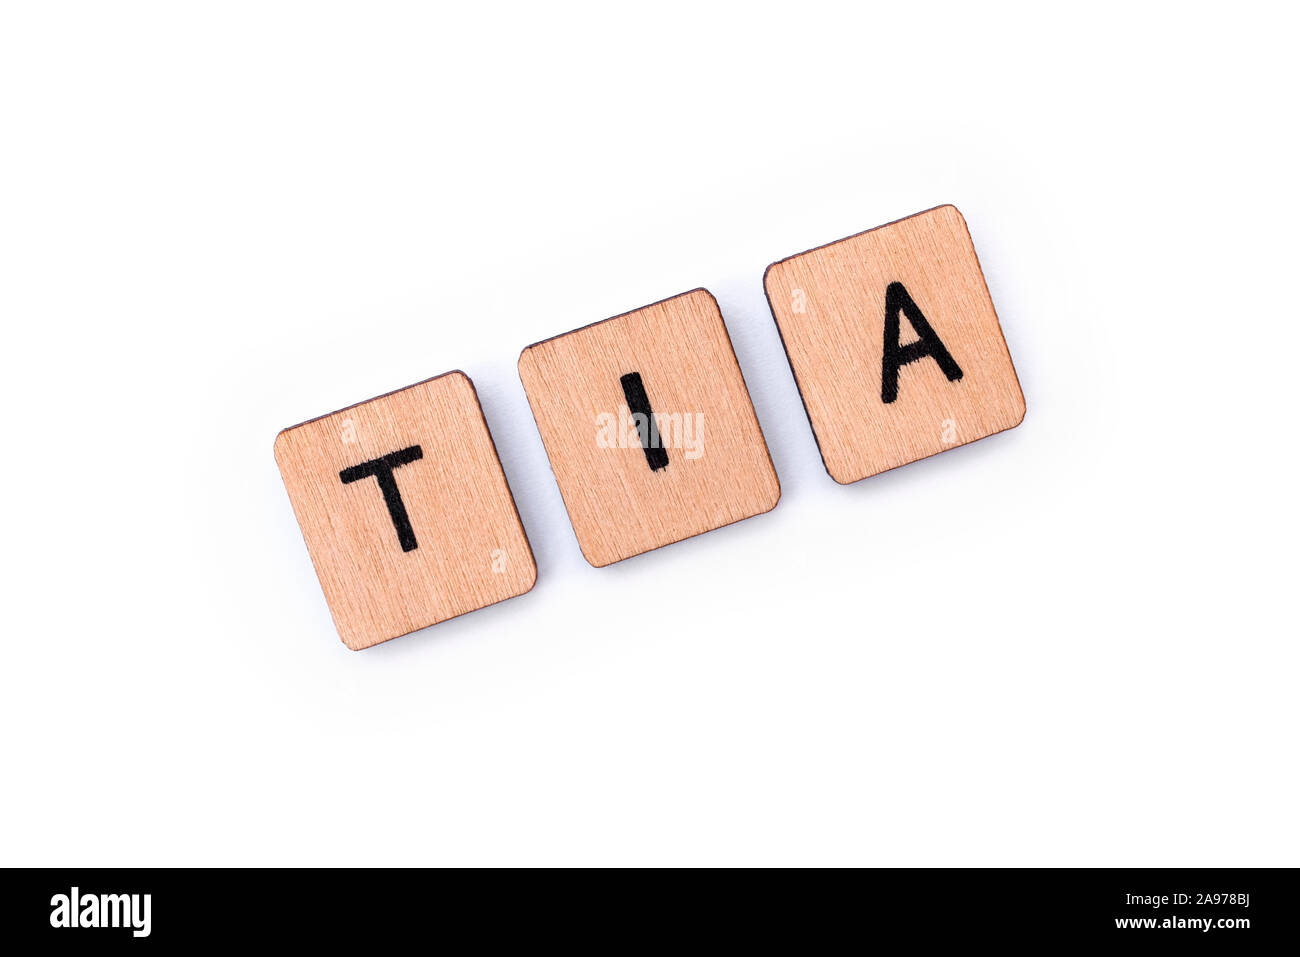 The abbreviation TIA - meaning Transient Ischemic Attack - the medical term for a mini-stroke, spelt with wooden letter tiles over a white background. Stock Photo